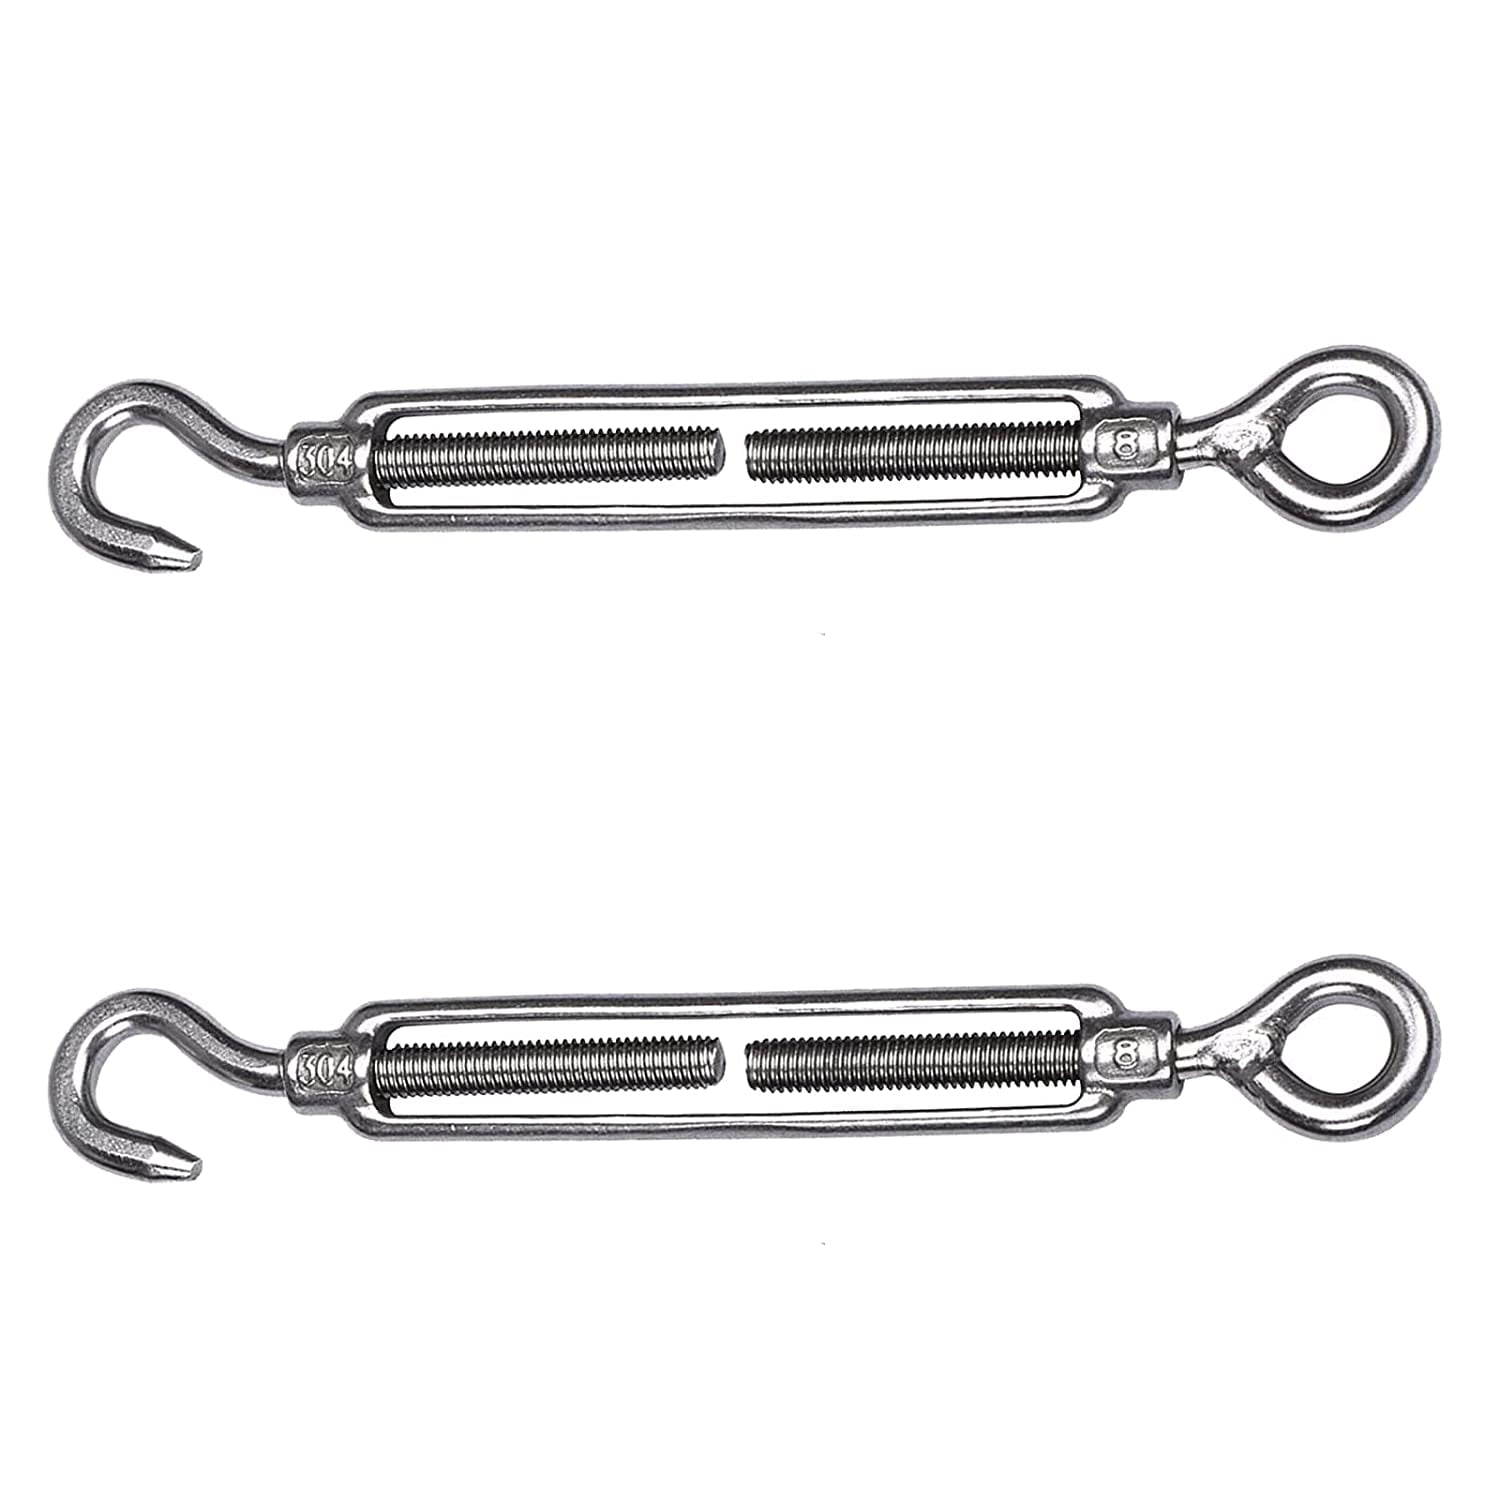 Famgee M4 304 Stainless Steel Turnbuckle Screw Hook Adjustable Wire Rope  Tension Draw-in Bolt Pack of 6 (Hook & Eye)